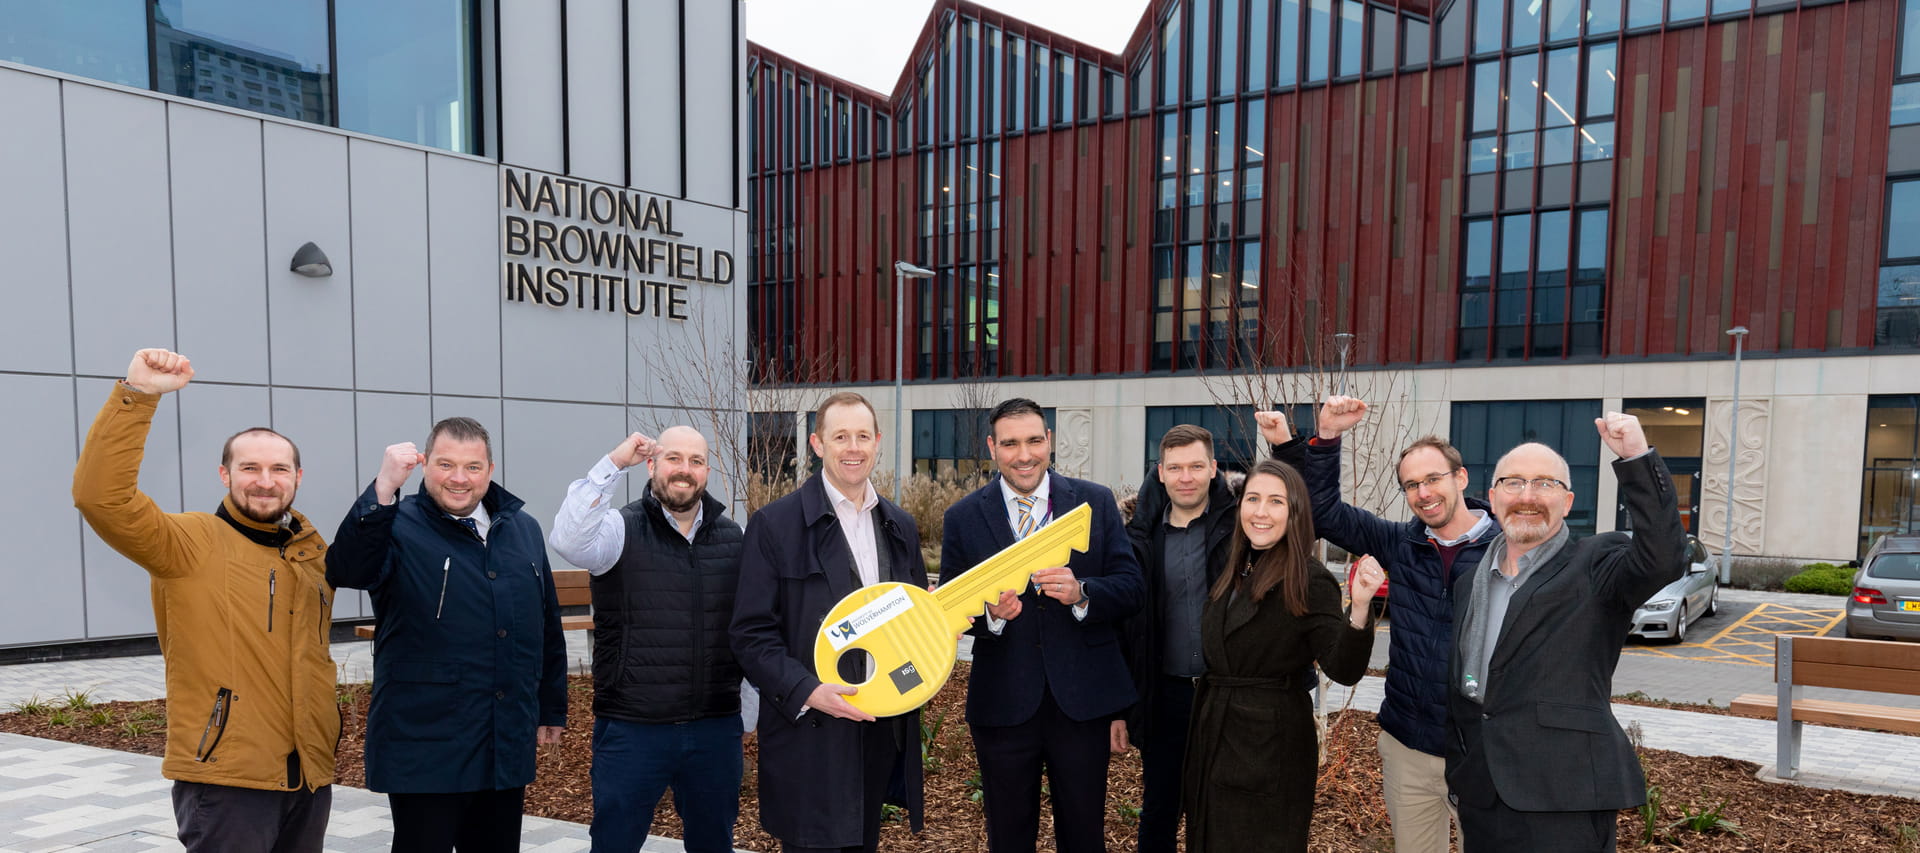 Team of people celebrating the handover of the National Brownfield Institute